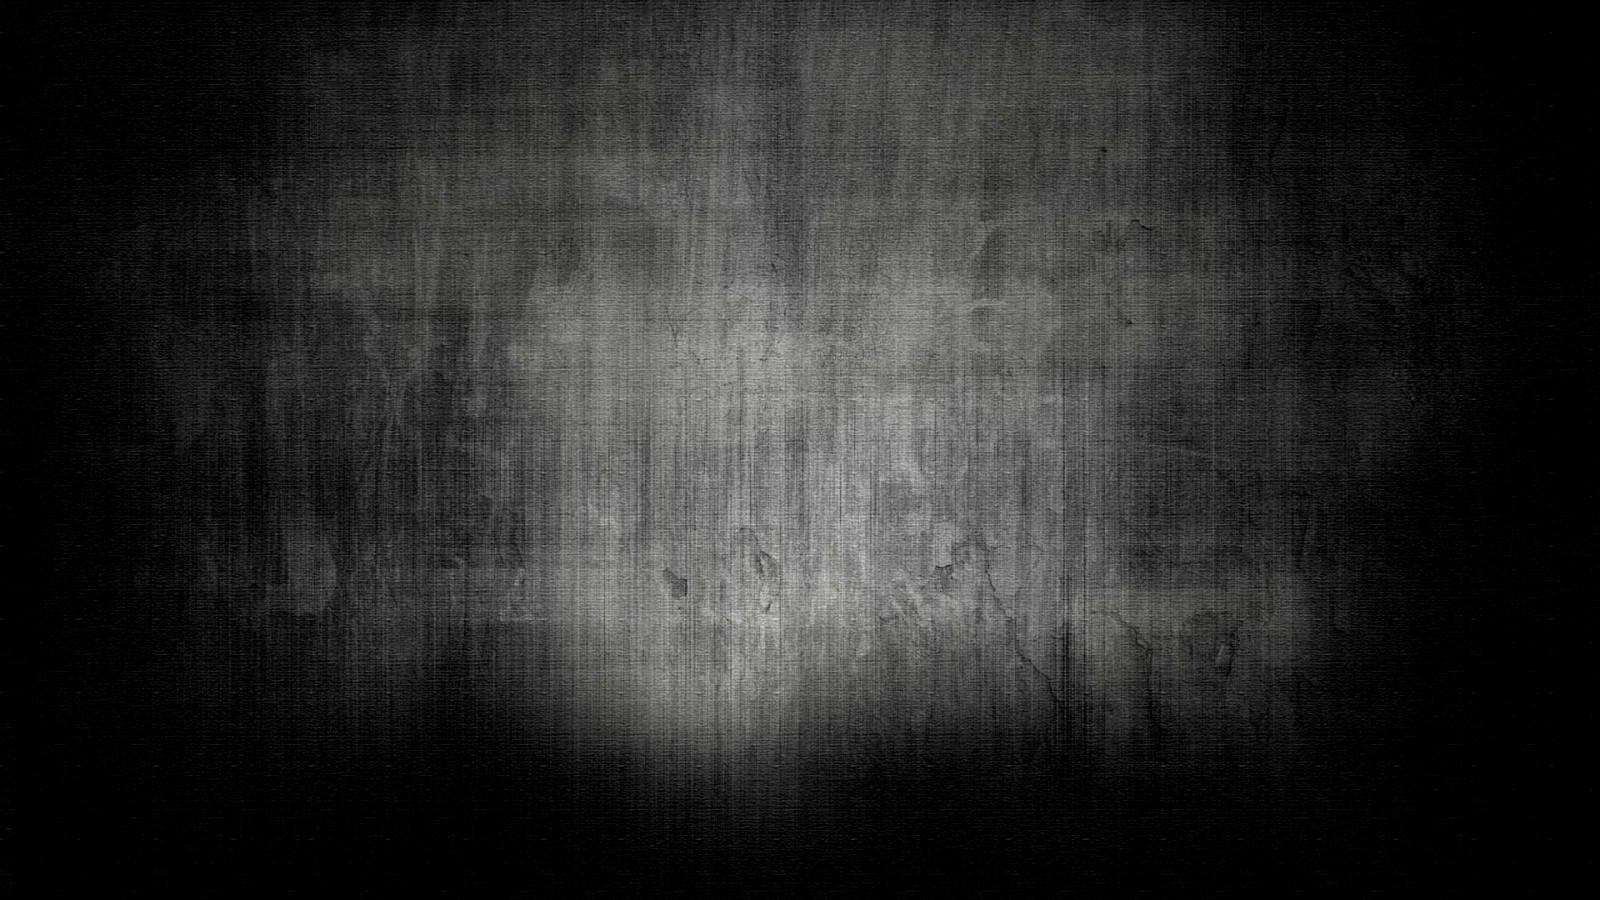 Free Download Dark Background Powerpoint Backgrounds For 1600x900 For Your Desktop Mobile Tablet Explore 75 Dark Background Black And White Desktop Wallpaper Dark Wallpaper Dark Wallpapers For Desktop